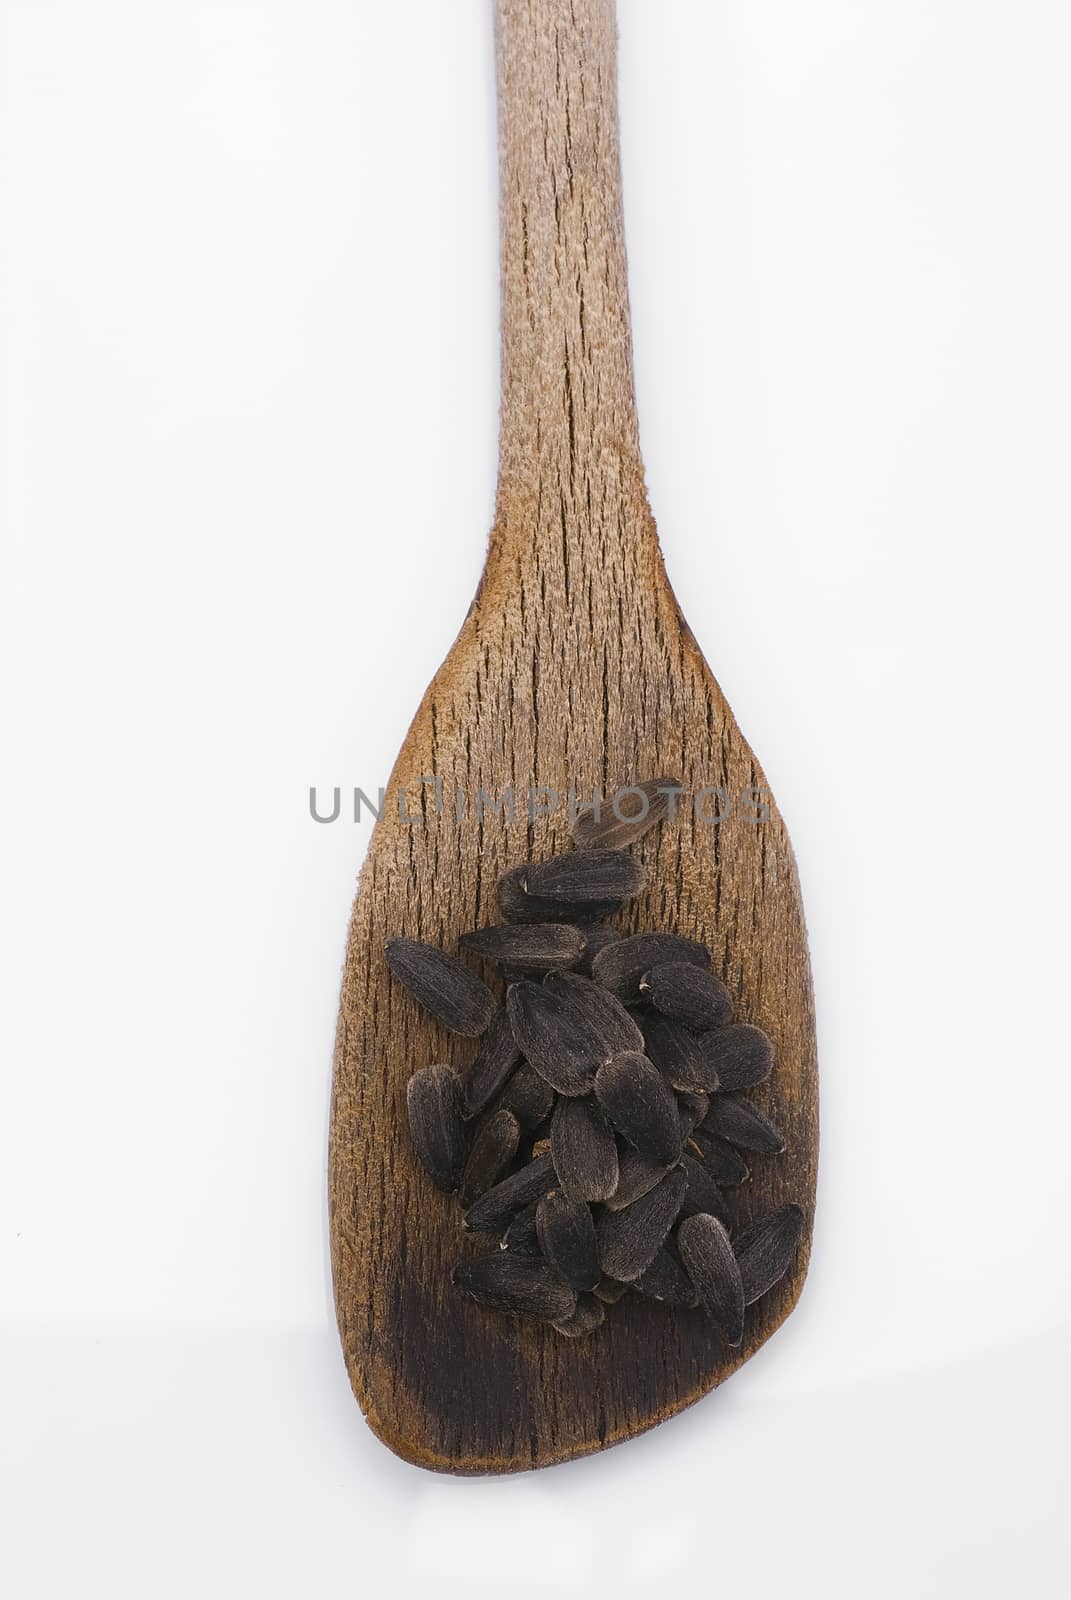 Sunflower seeds with wooden spoon isolated on white background.